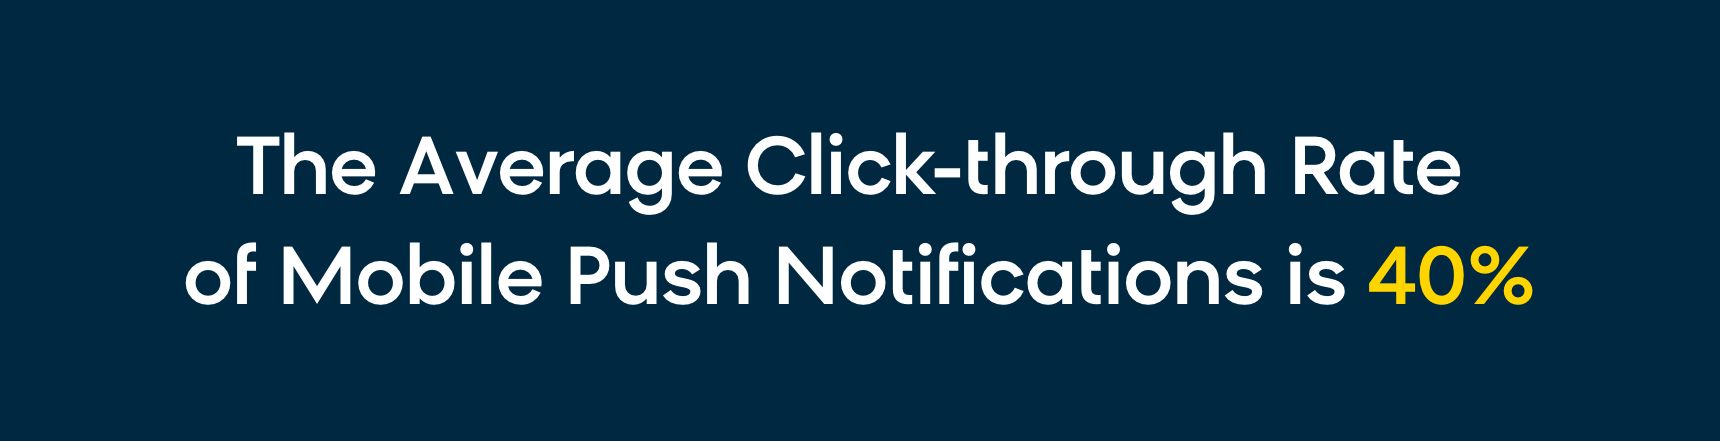 The Average Click-through Rate of Mobile Push Notifications is 40%